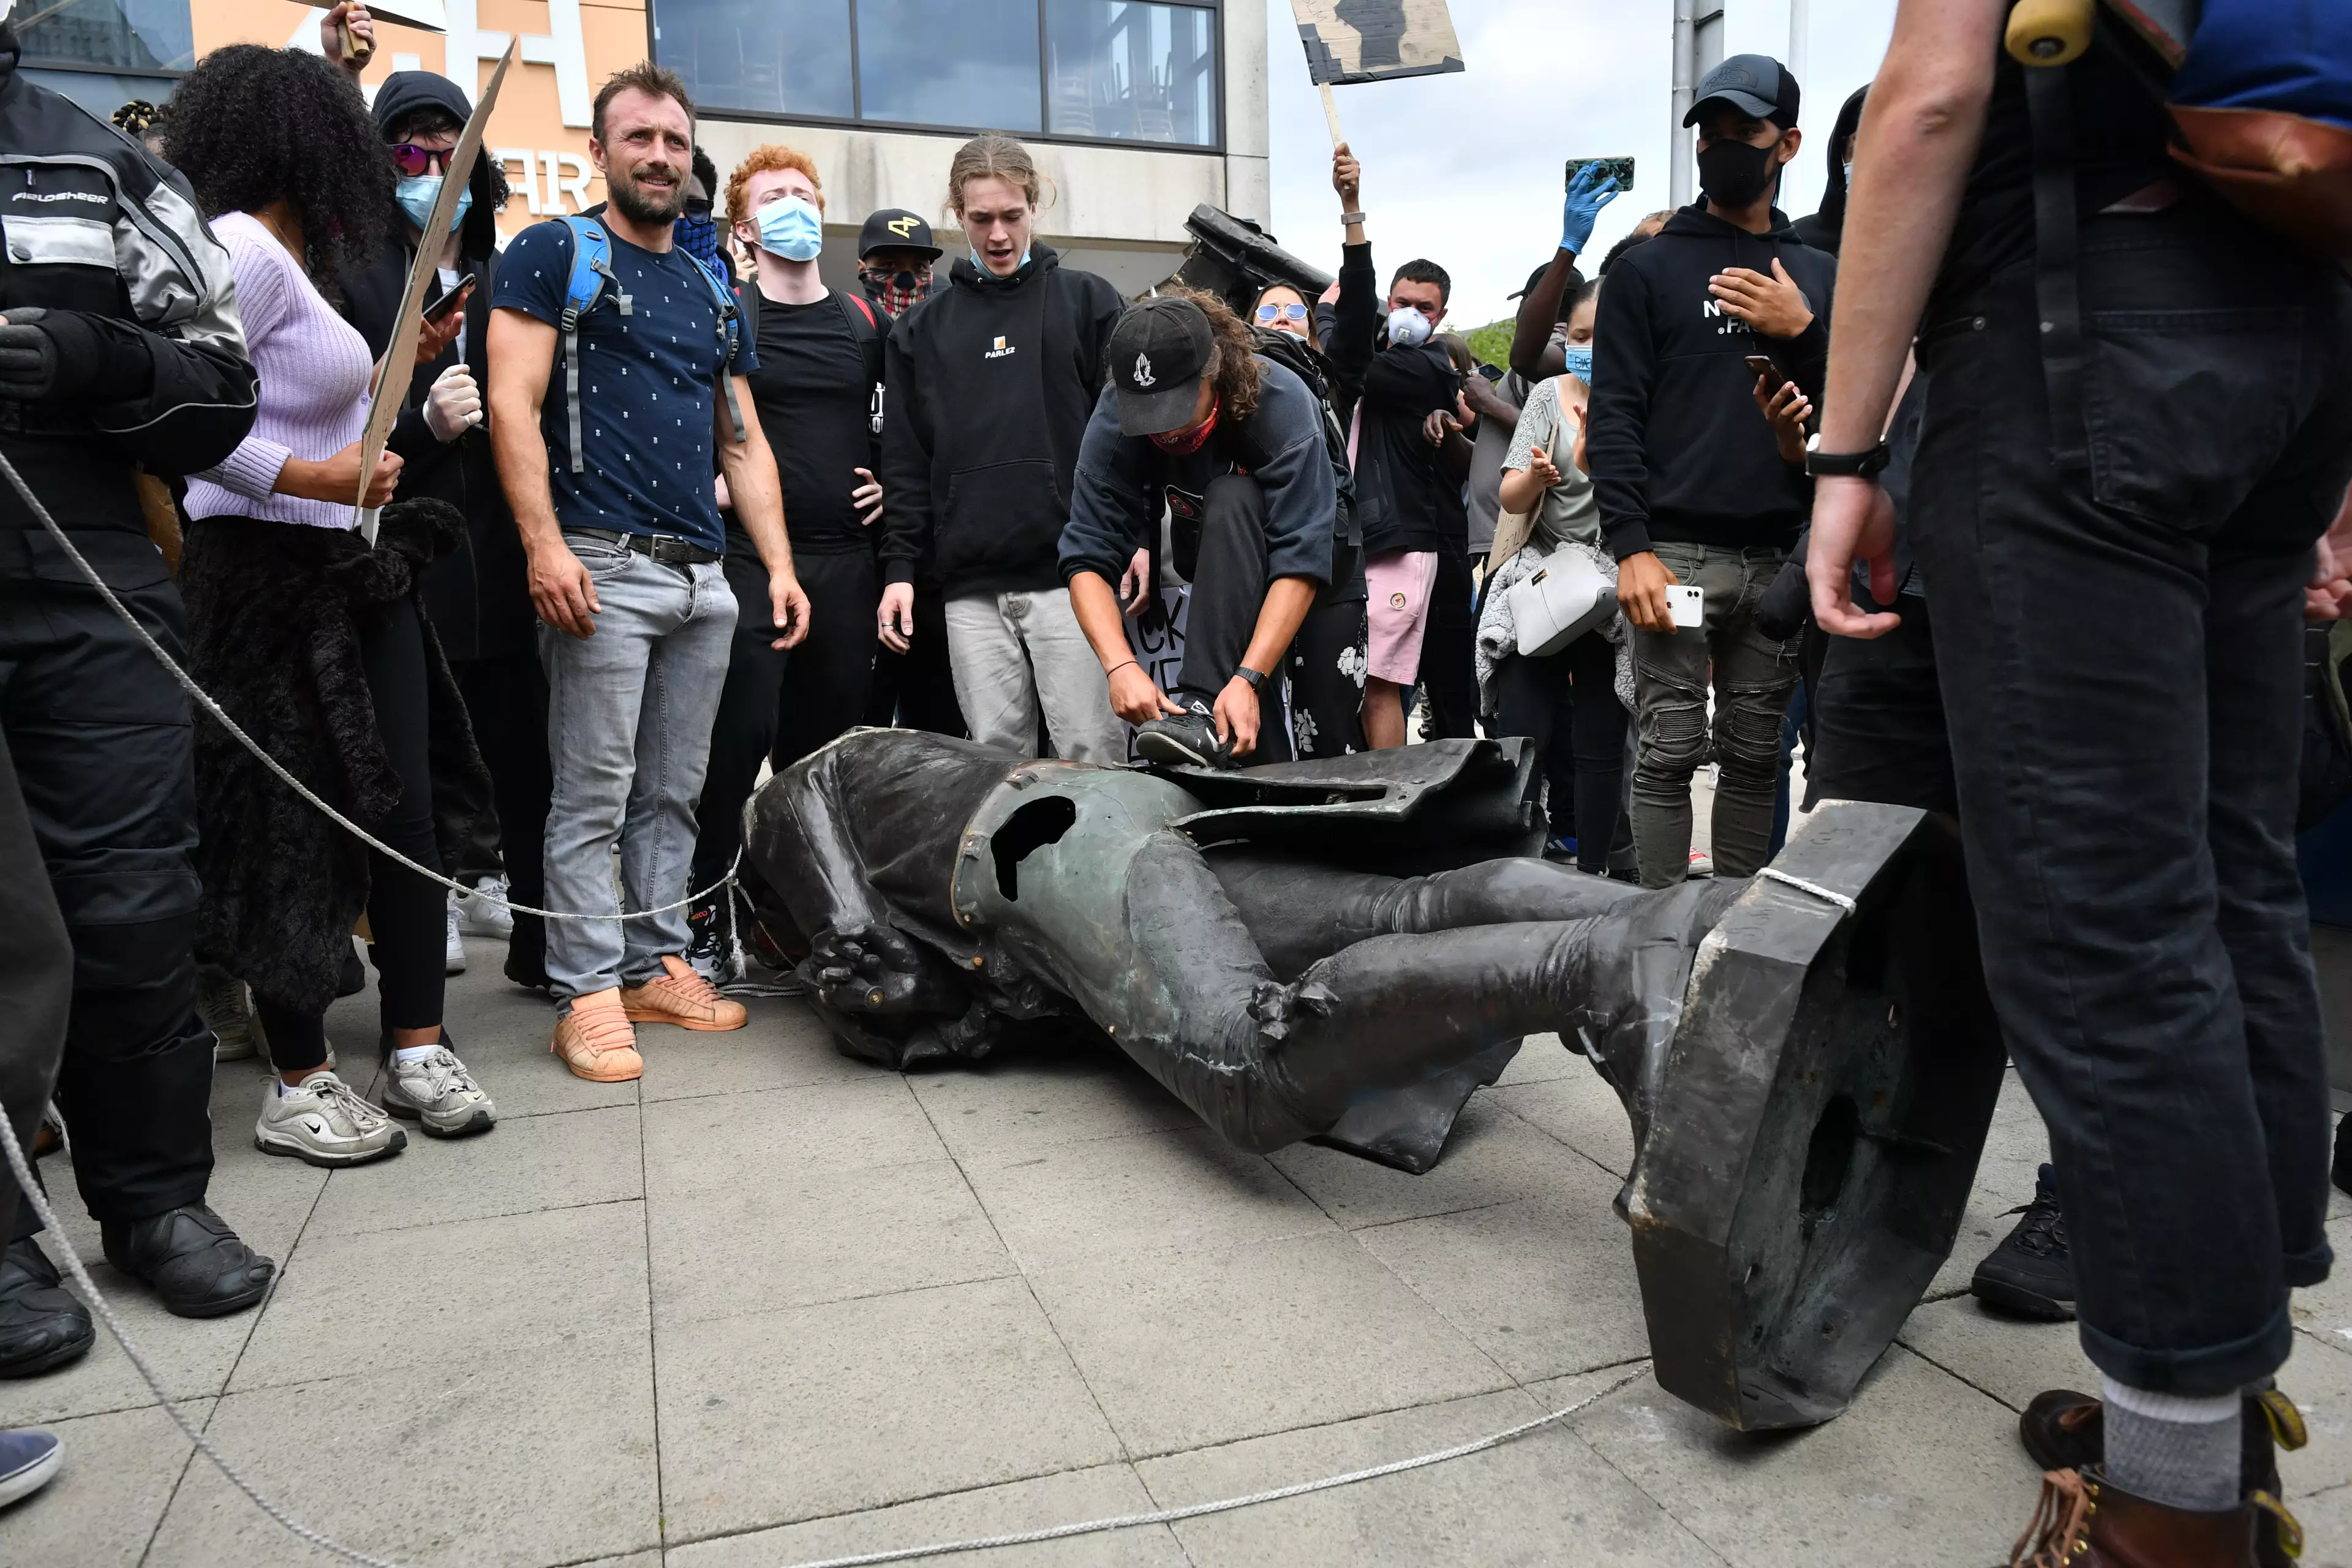 Protesters ripped down the statue to 17th century slave trader Edward Colston.